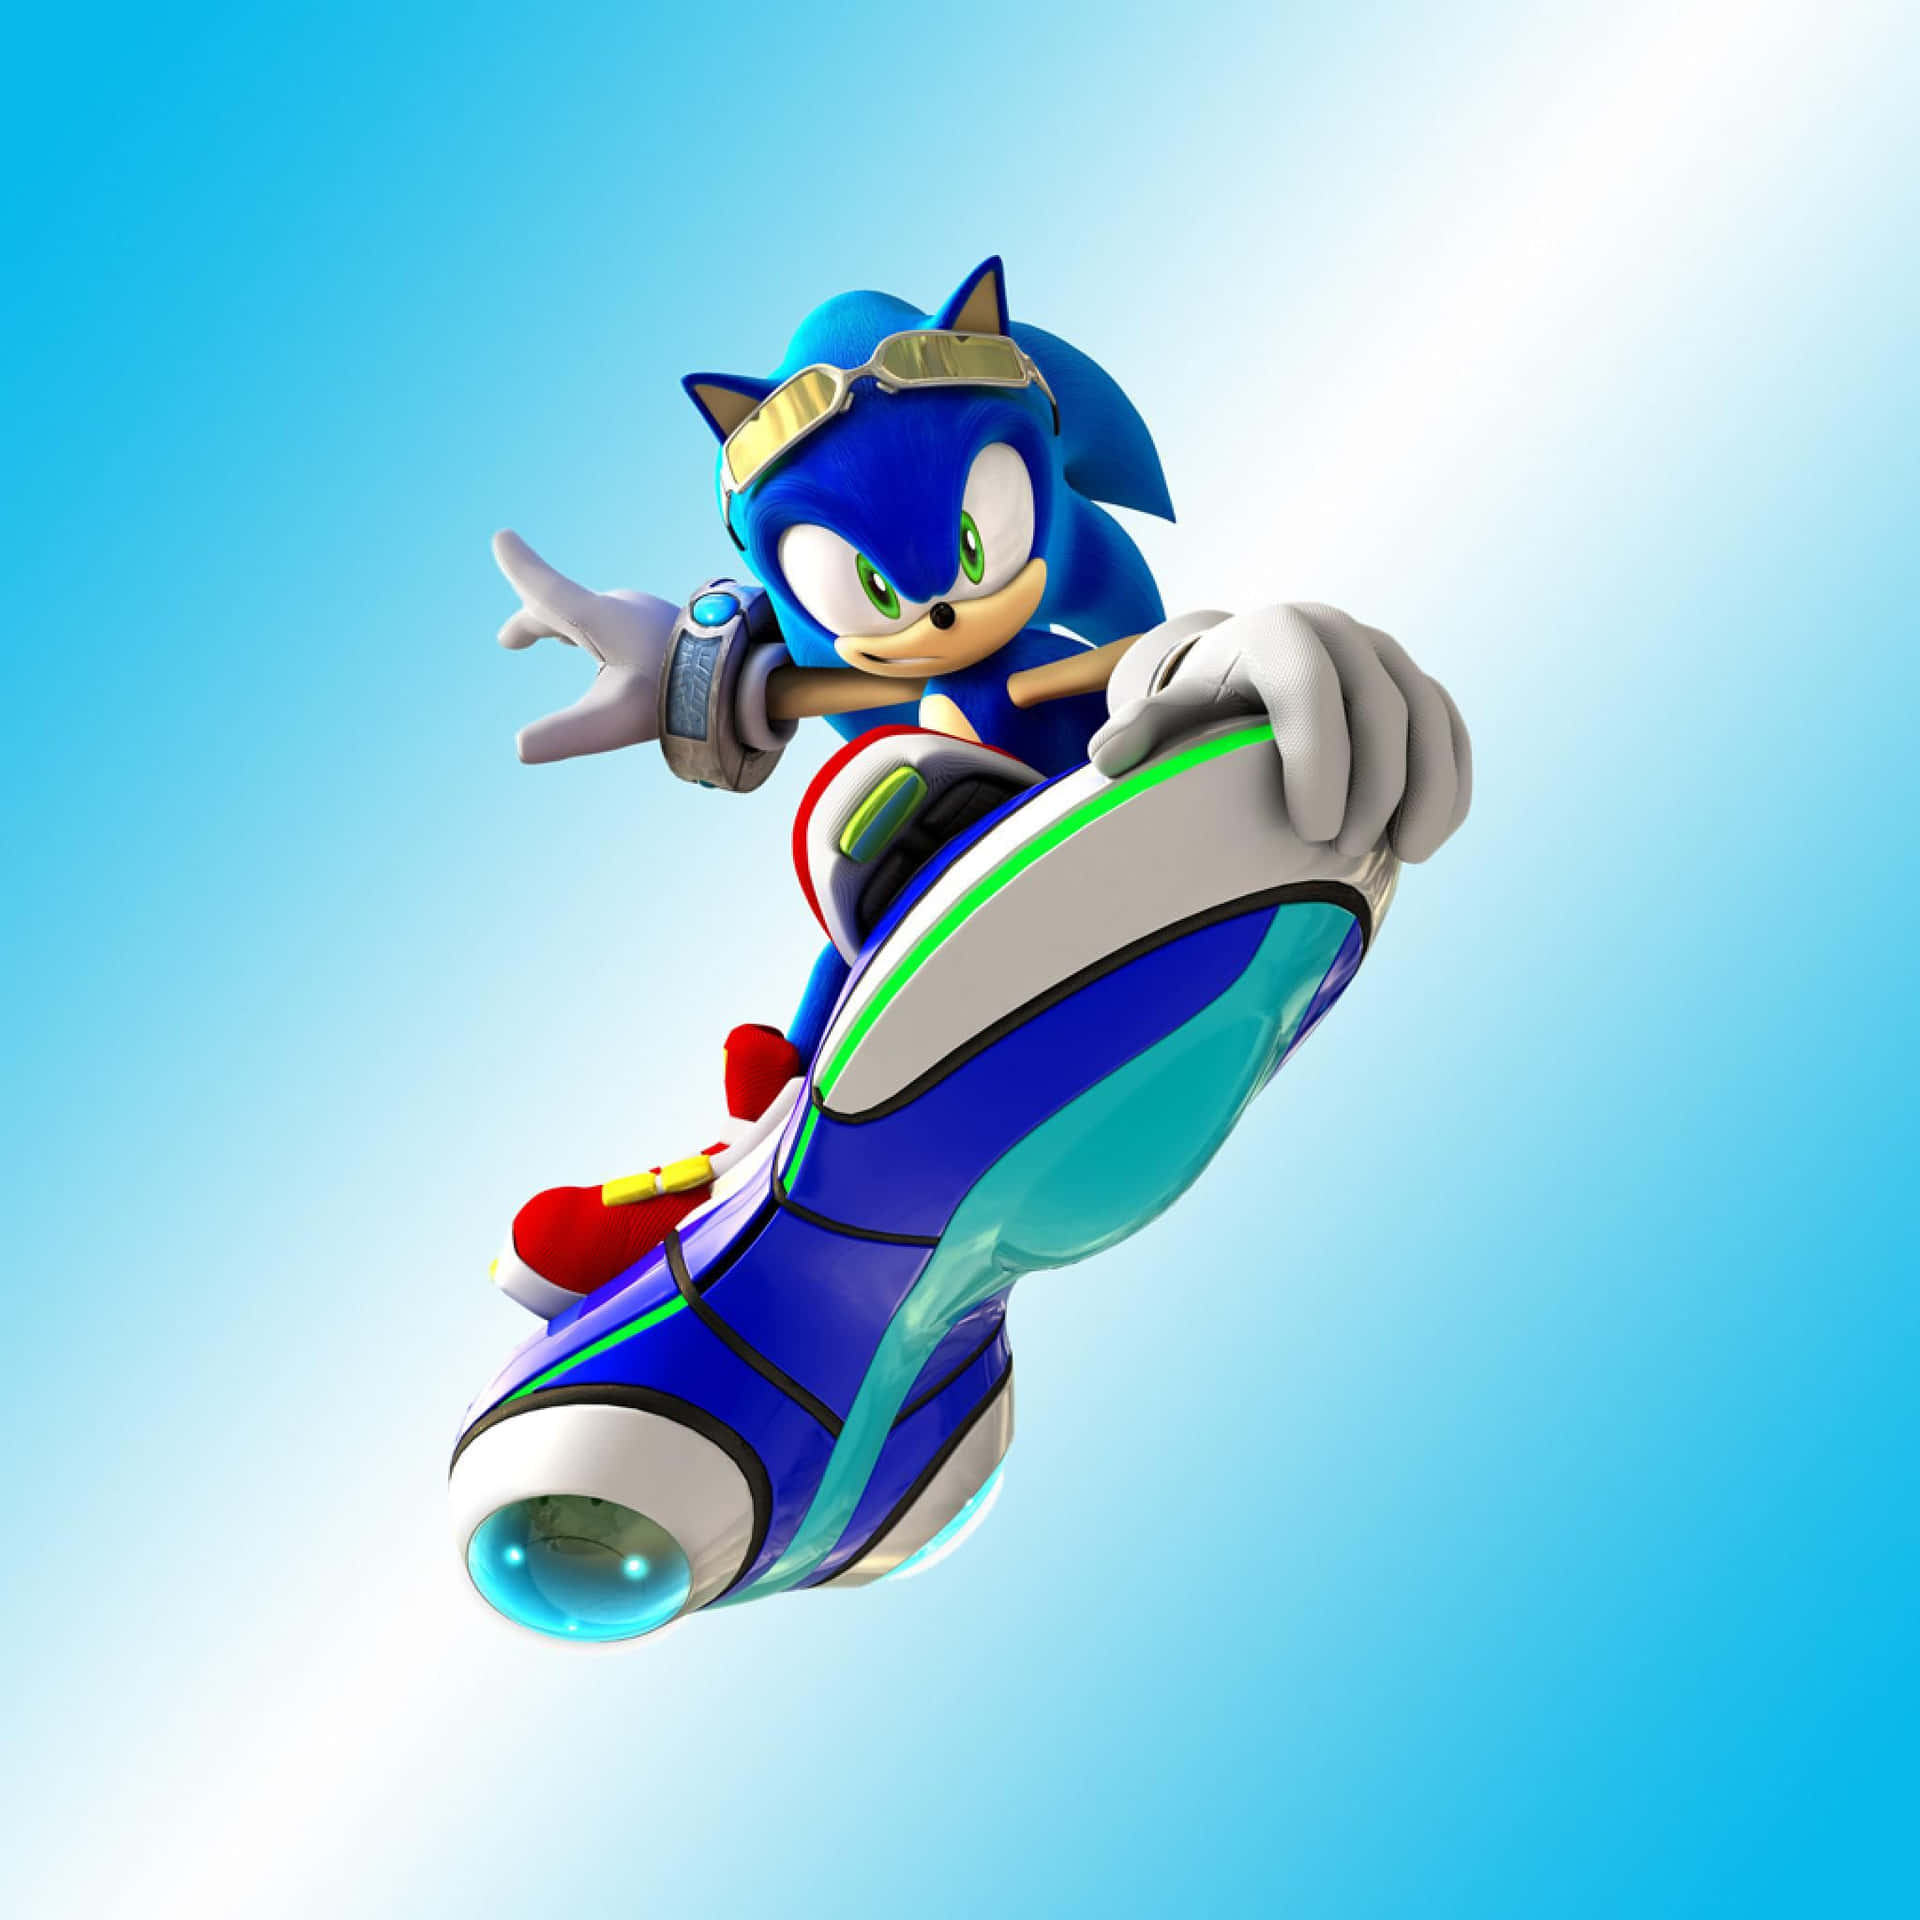 Sonic The Hedgehog Jumping In The Air